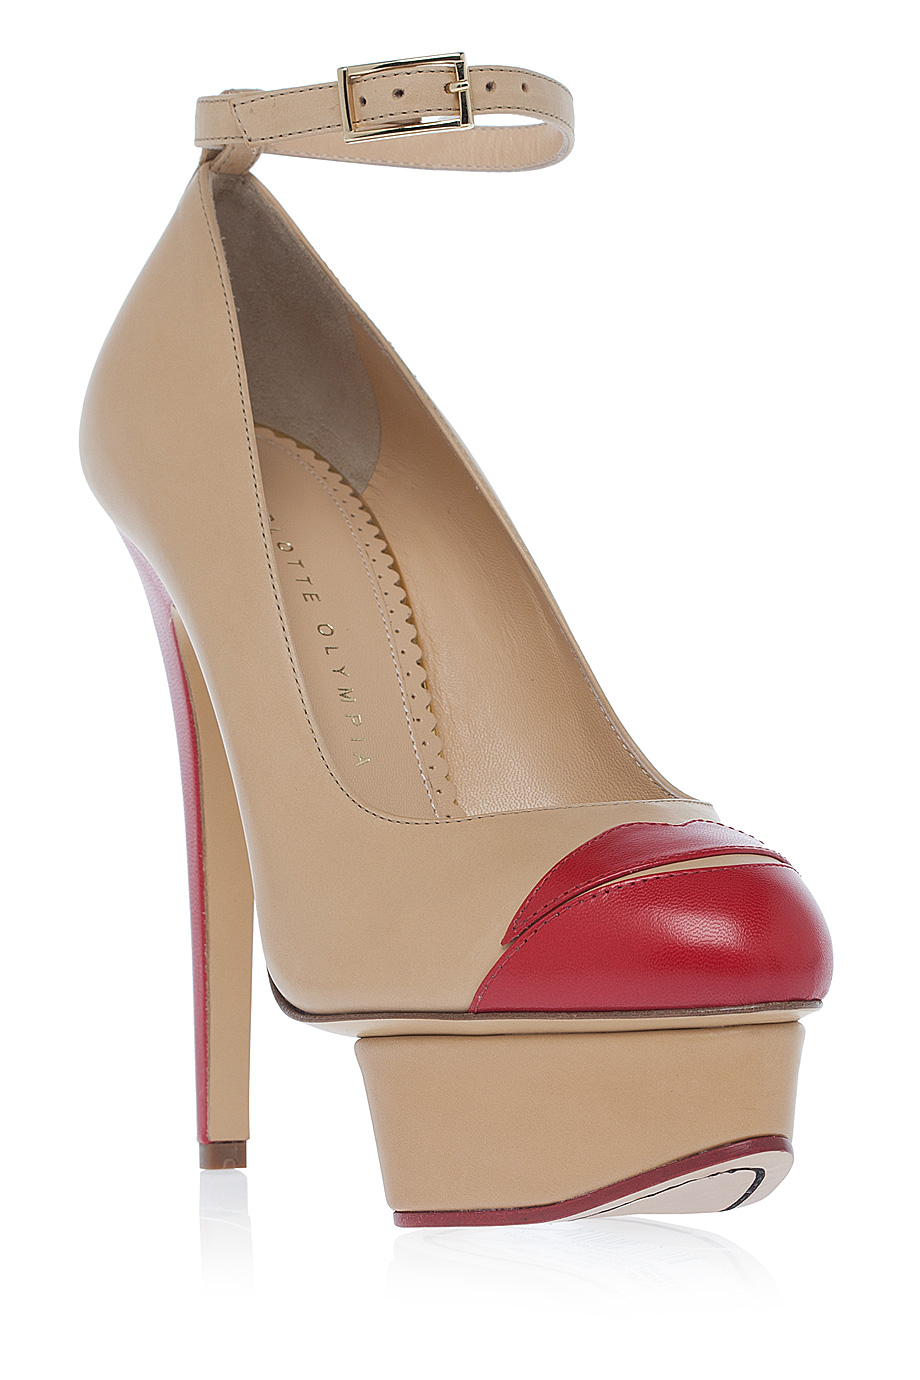 Lyst - Charlotte Olympia Kiss Me Dolores Shoes in Natural